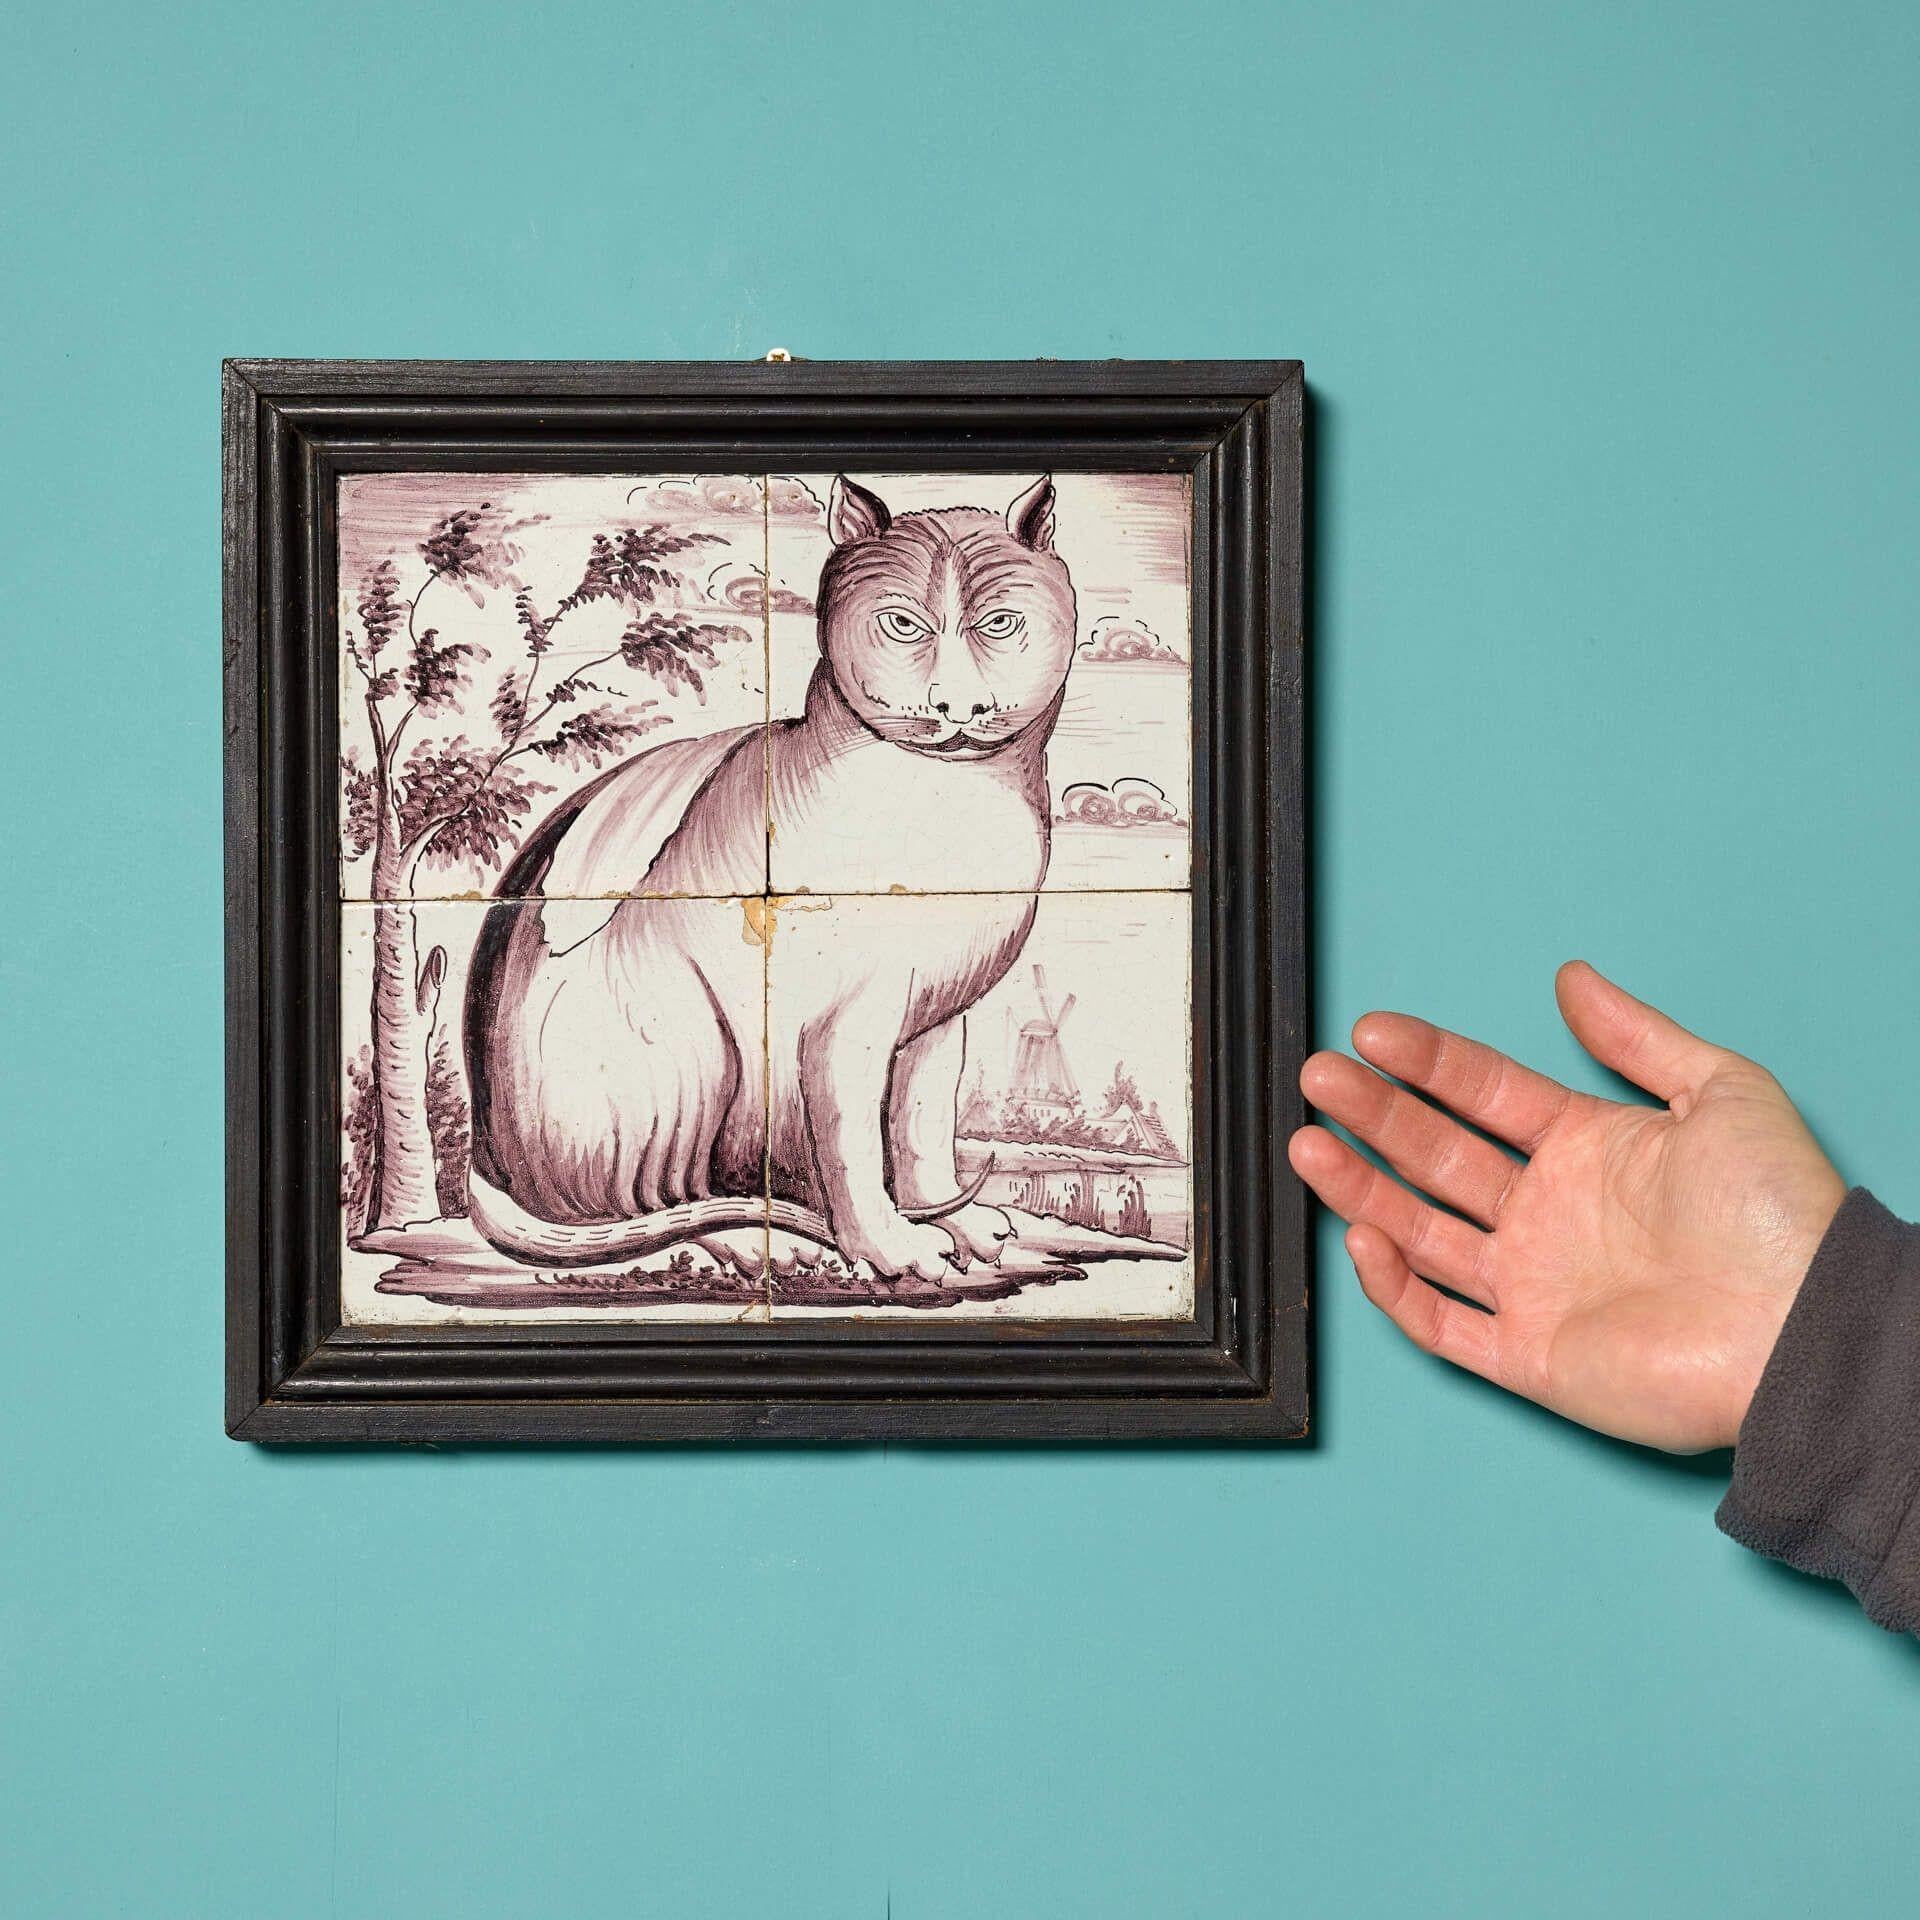 This antique framed tile panel depicting a cat in landscape sourced from the estate of Dame Barbara Mary Quant is quite the find. Displayed in a frame, the tiles form a stunning artwork piece, looking wonderful hung on the wall of period and